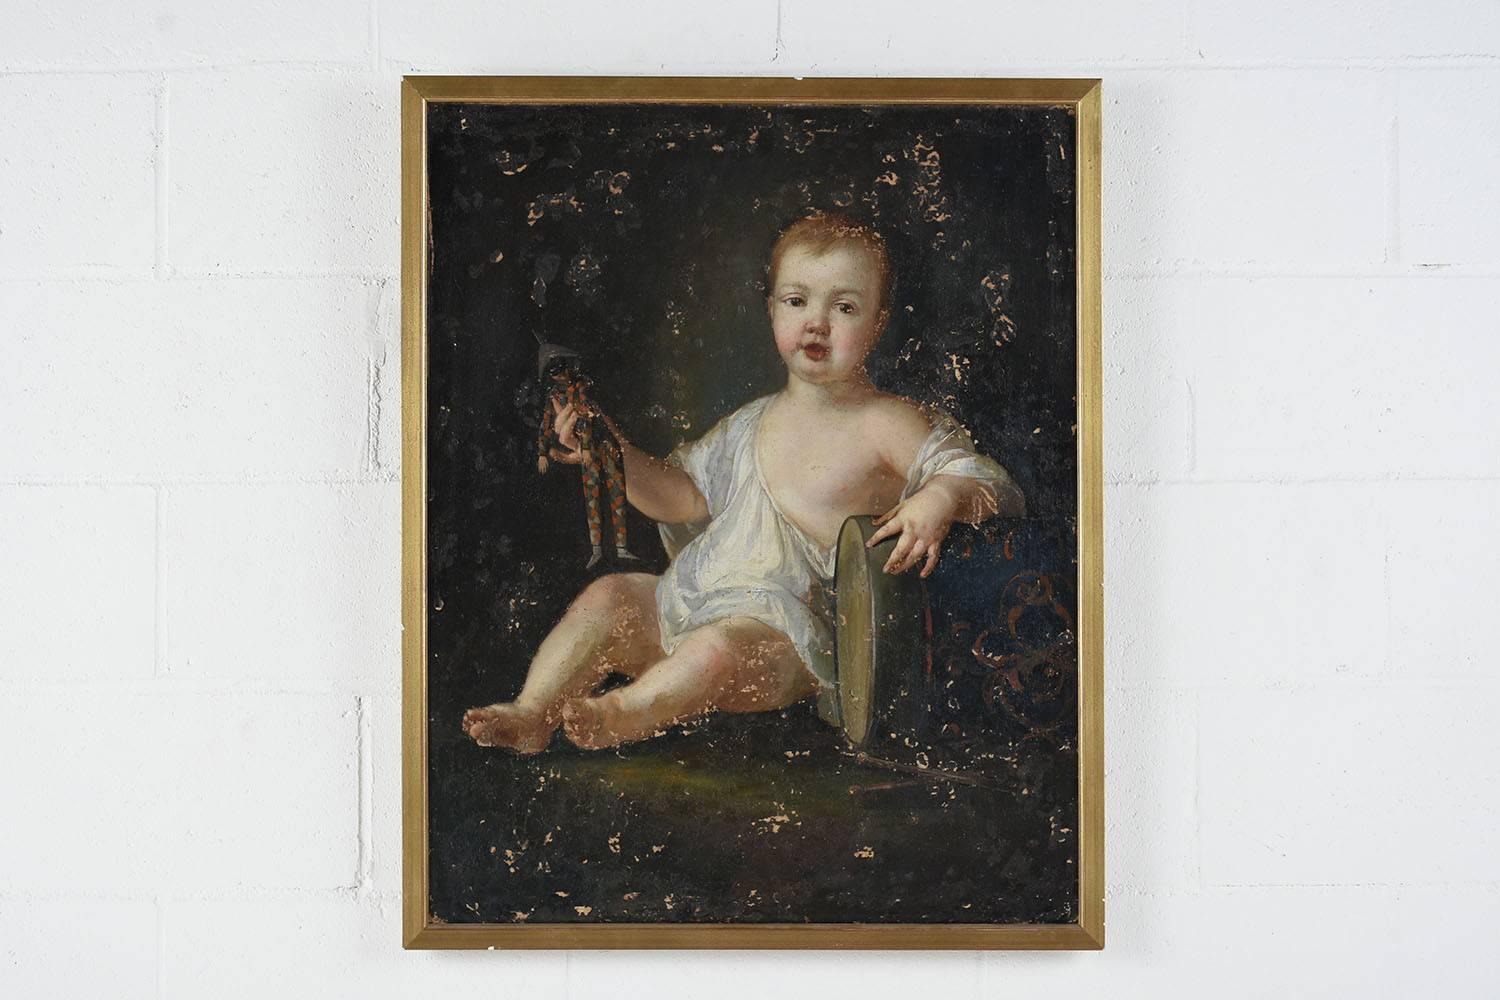 This early 1800s Baroque-style oil painting depicts a portrait of a child playing with toys. The red haired child is clothed in a piece of fabric that drapes over its shoulder and rests in its lap. The child is seated leaning on a toy drum. In the